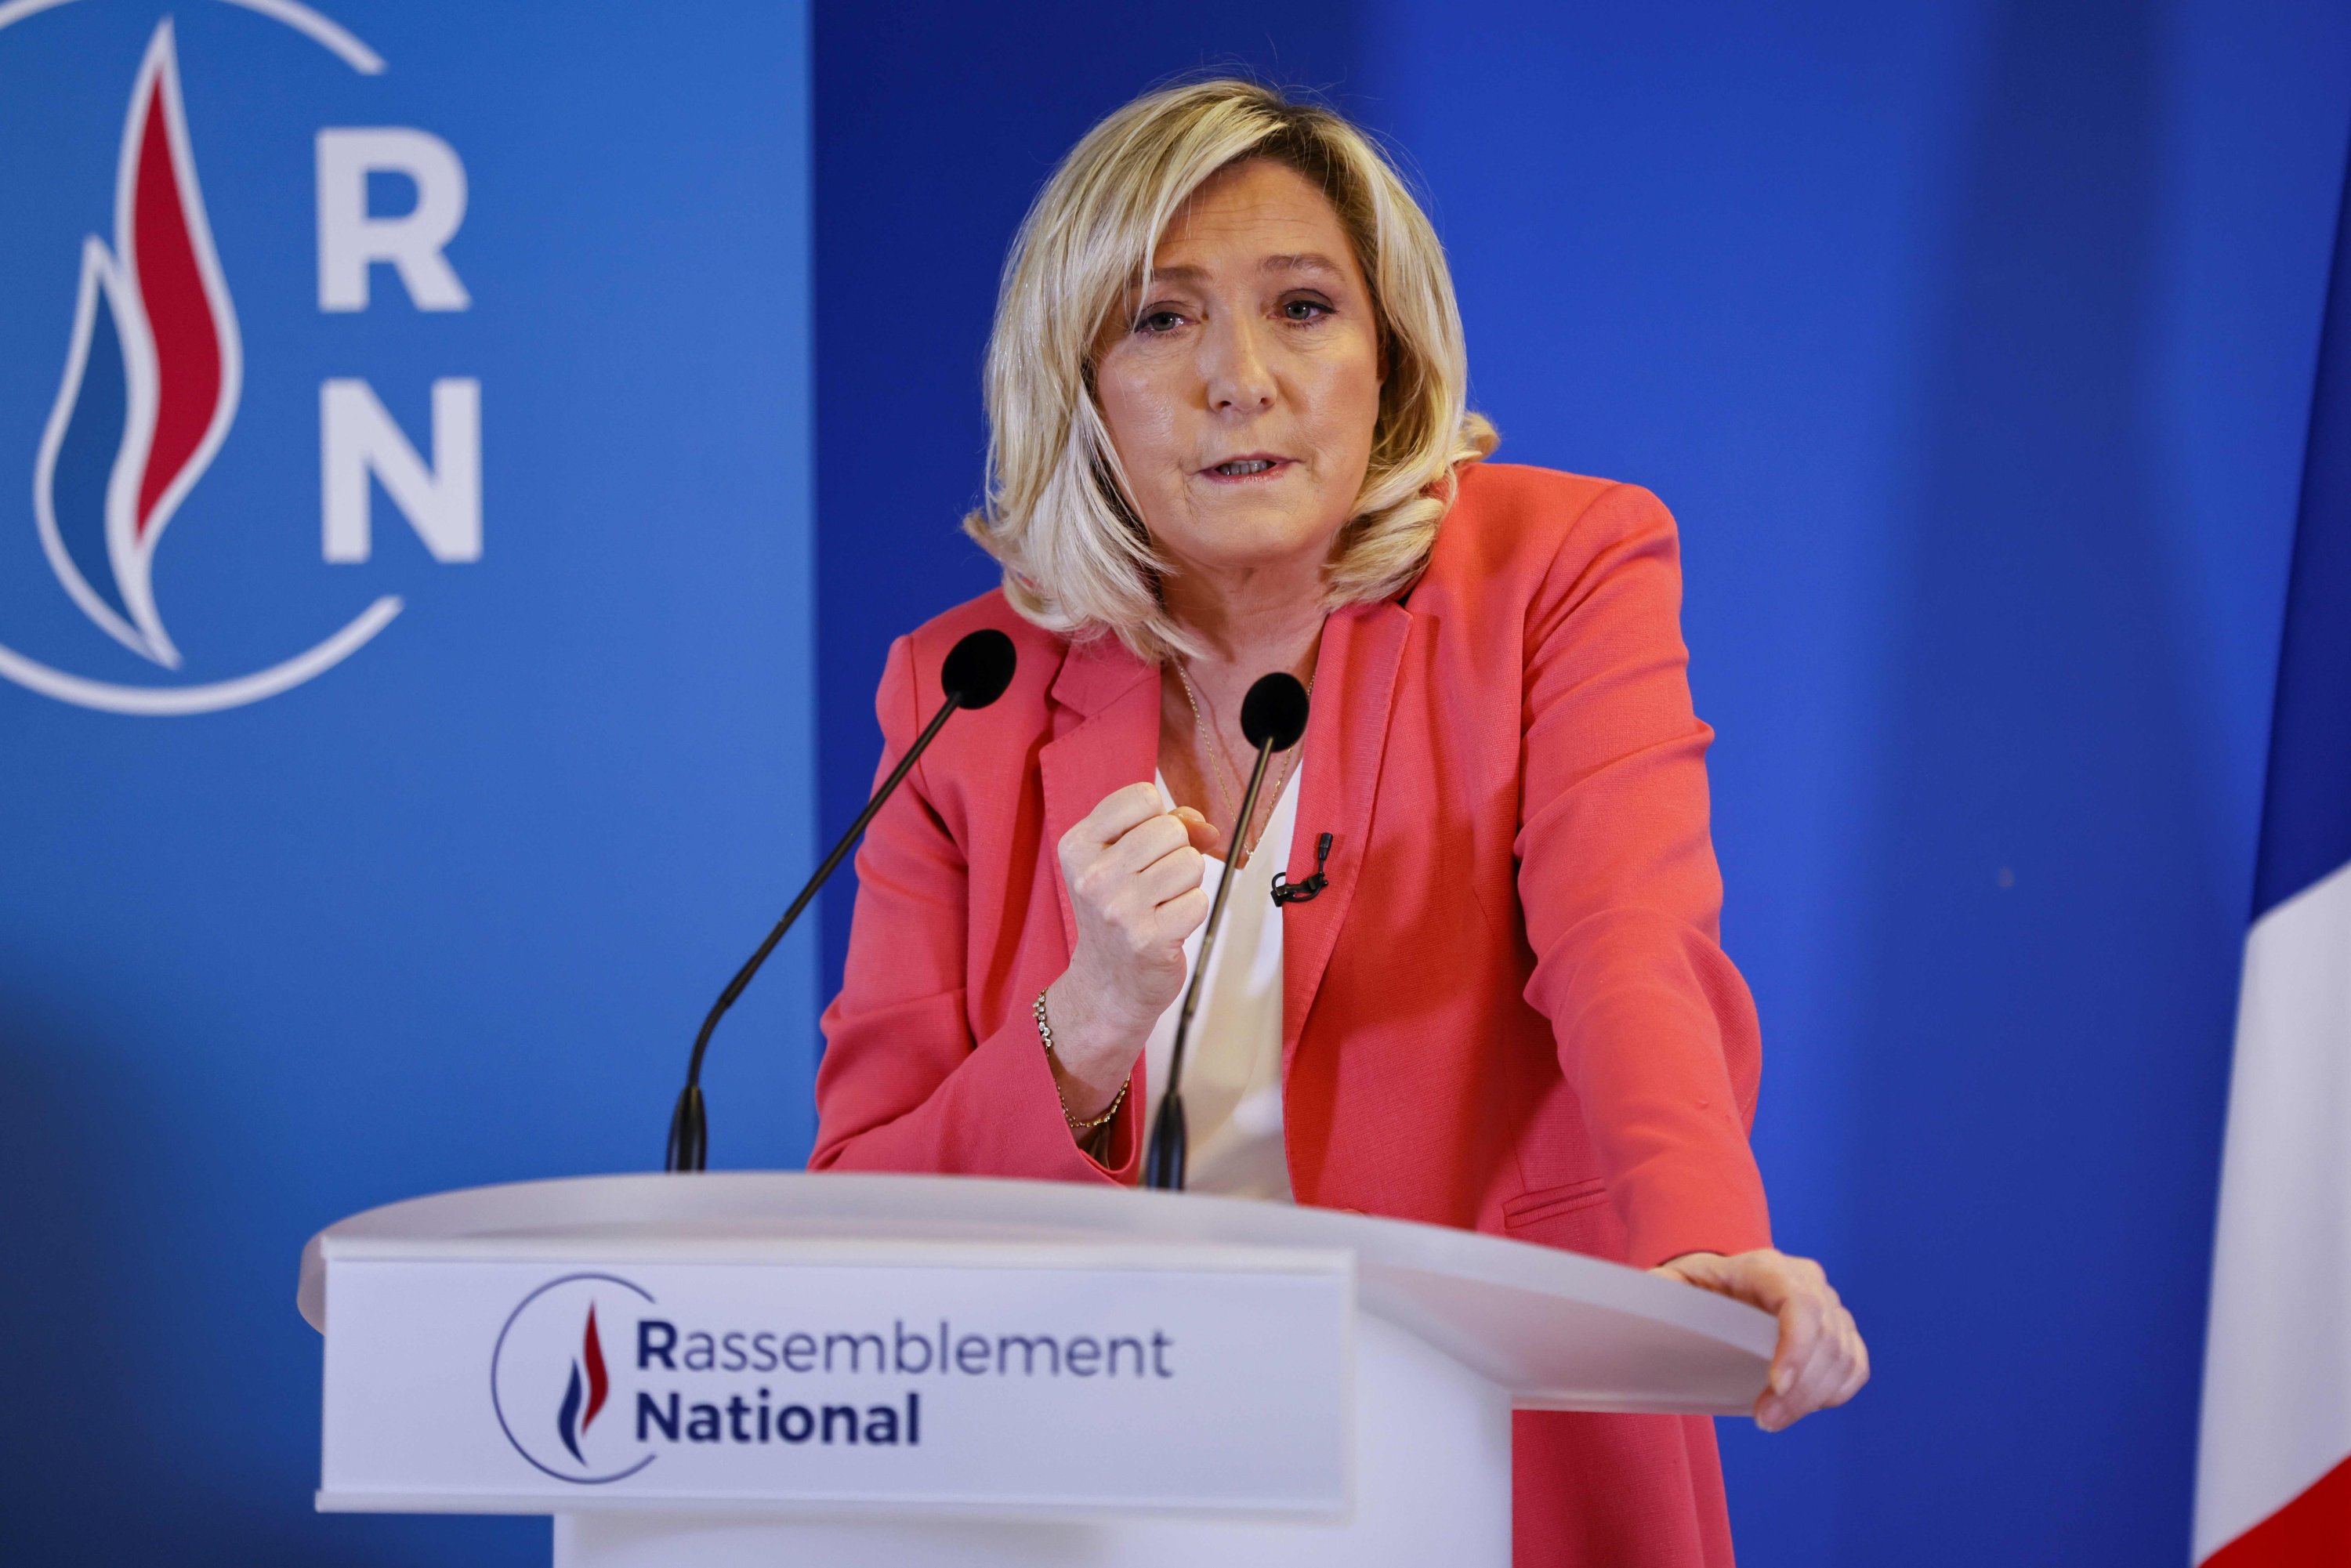 French far-right leader Marine Le Pen proposes headscarf ban